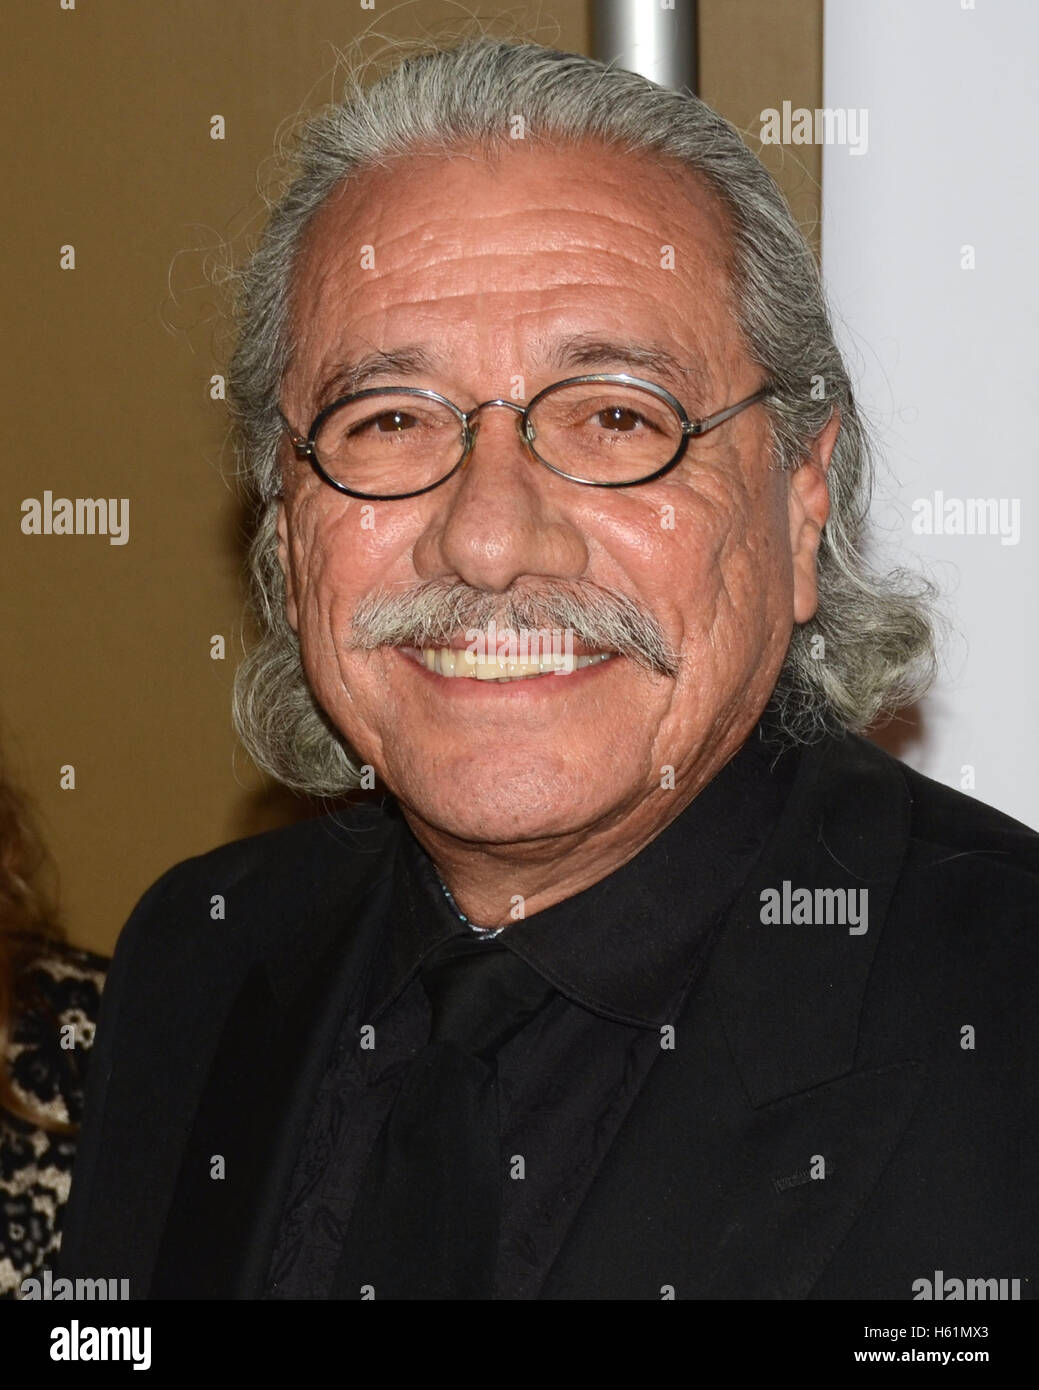 Edward James Olmos arrives at the 30th Annual Imagen Awards on August 21, 2015 in Los Angeles, California. Stock Photo